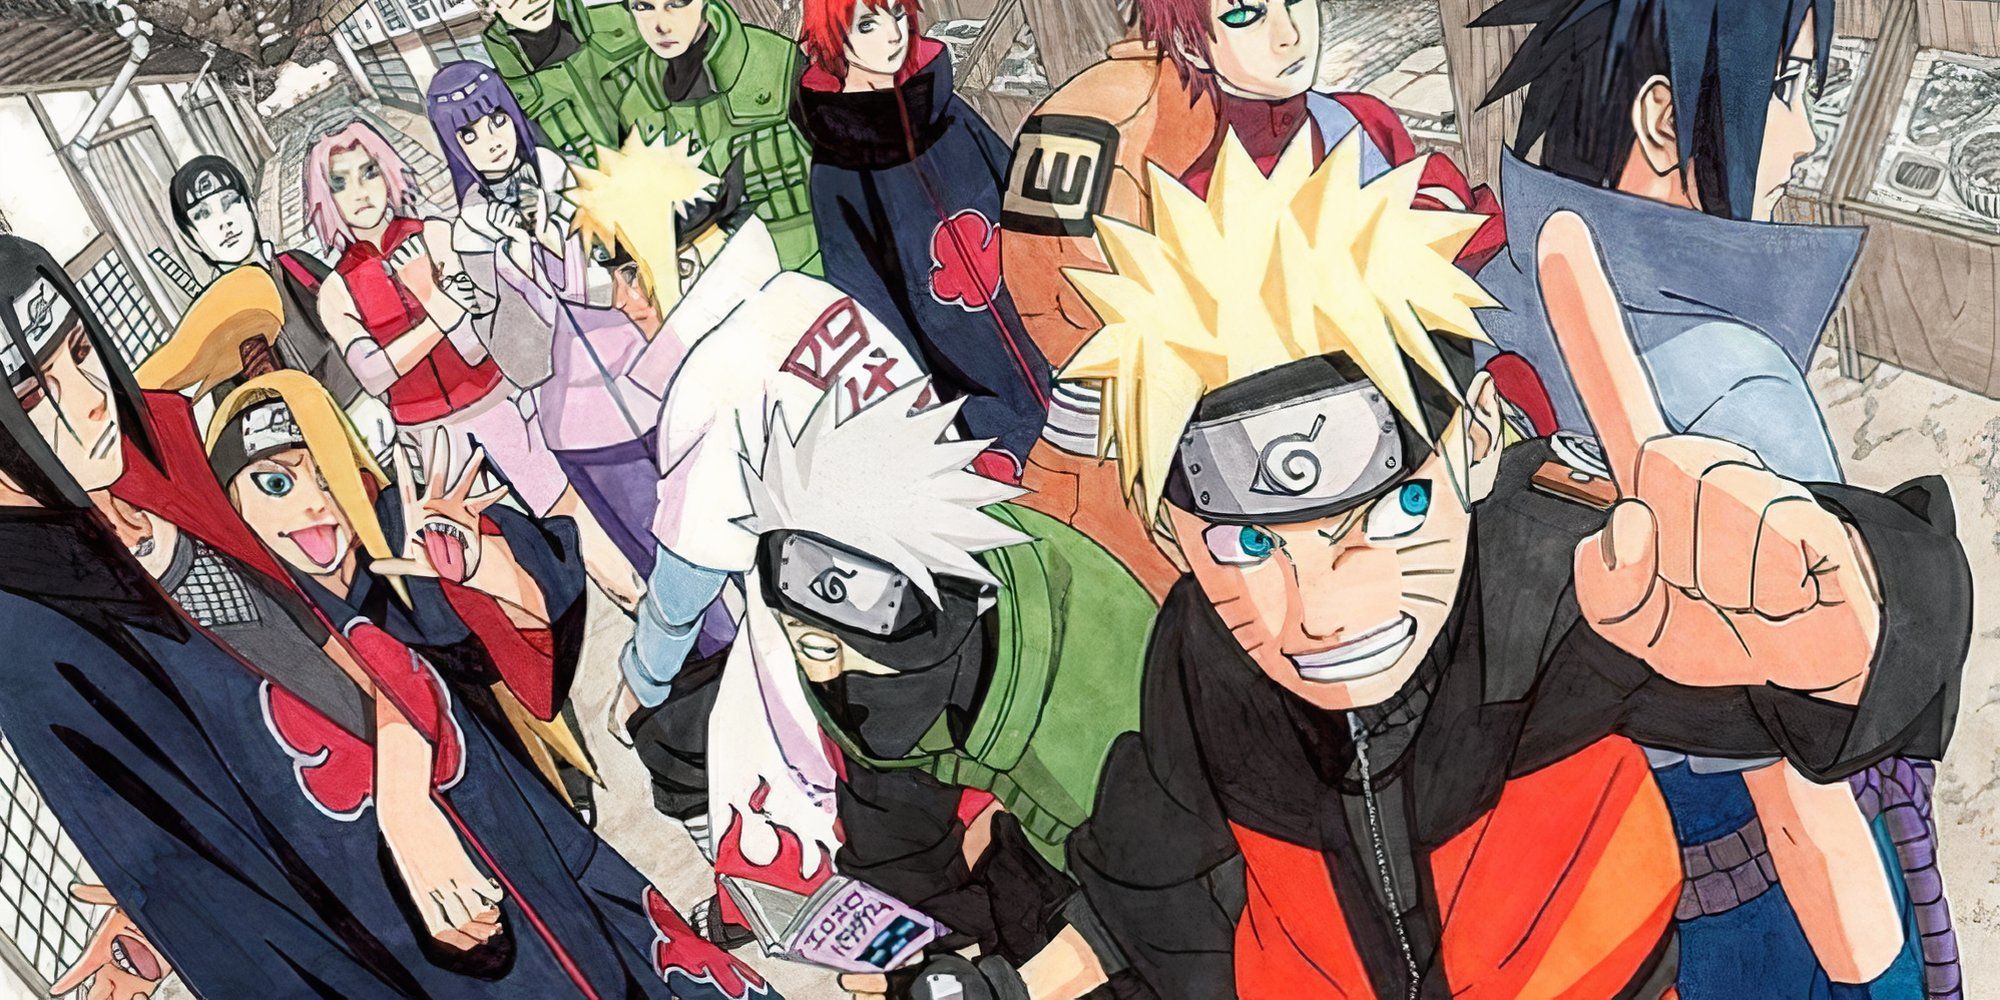 Illustration of Naruto's main cast of characters